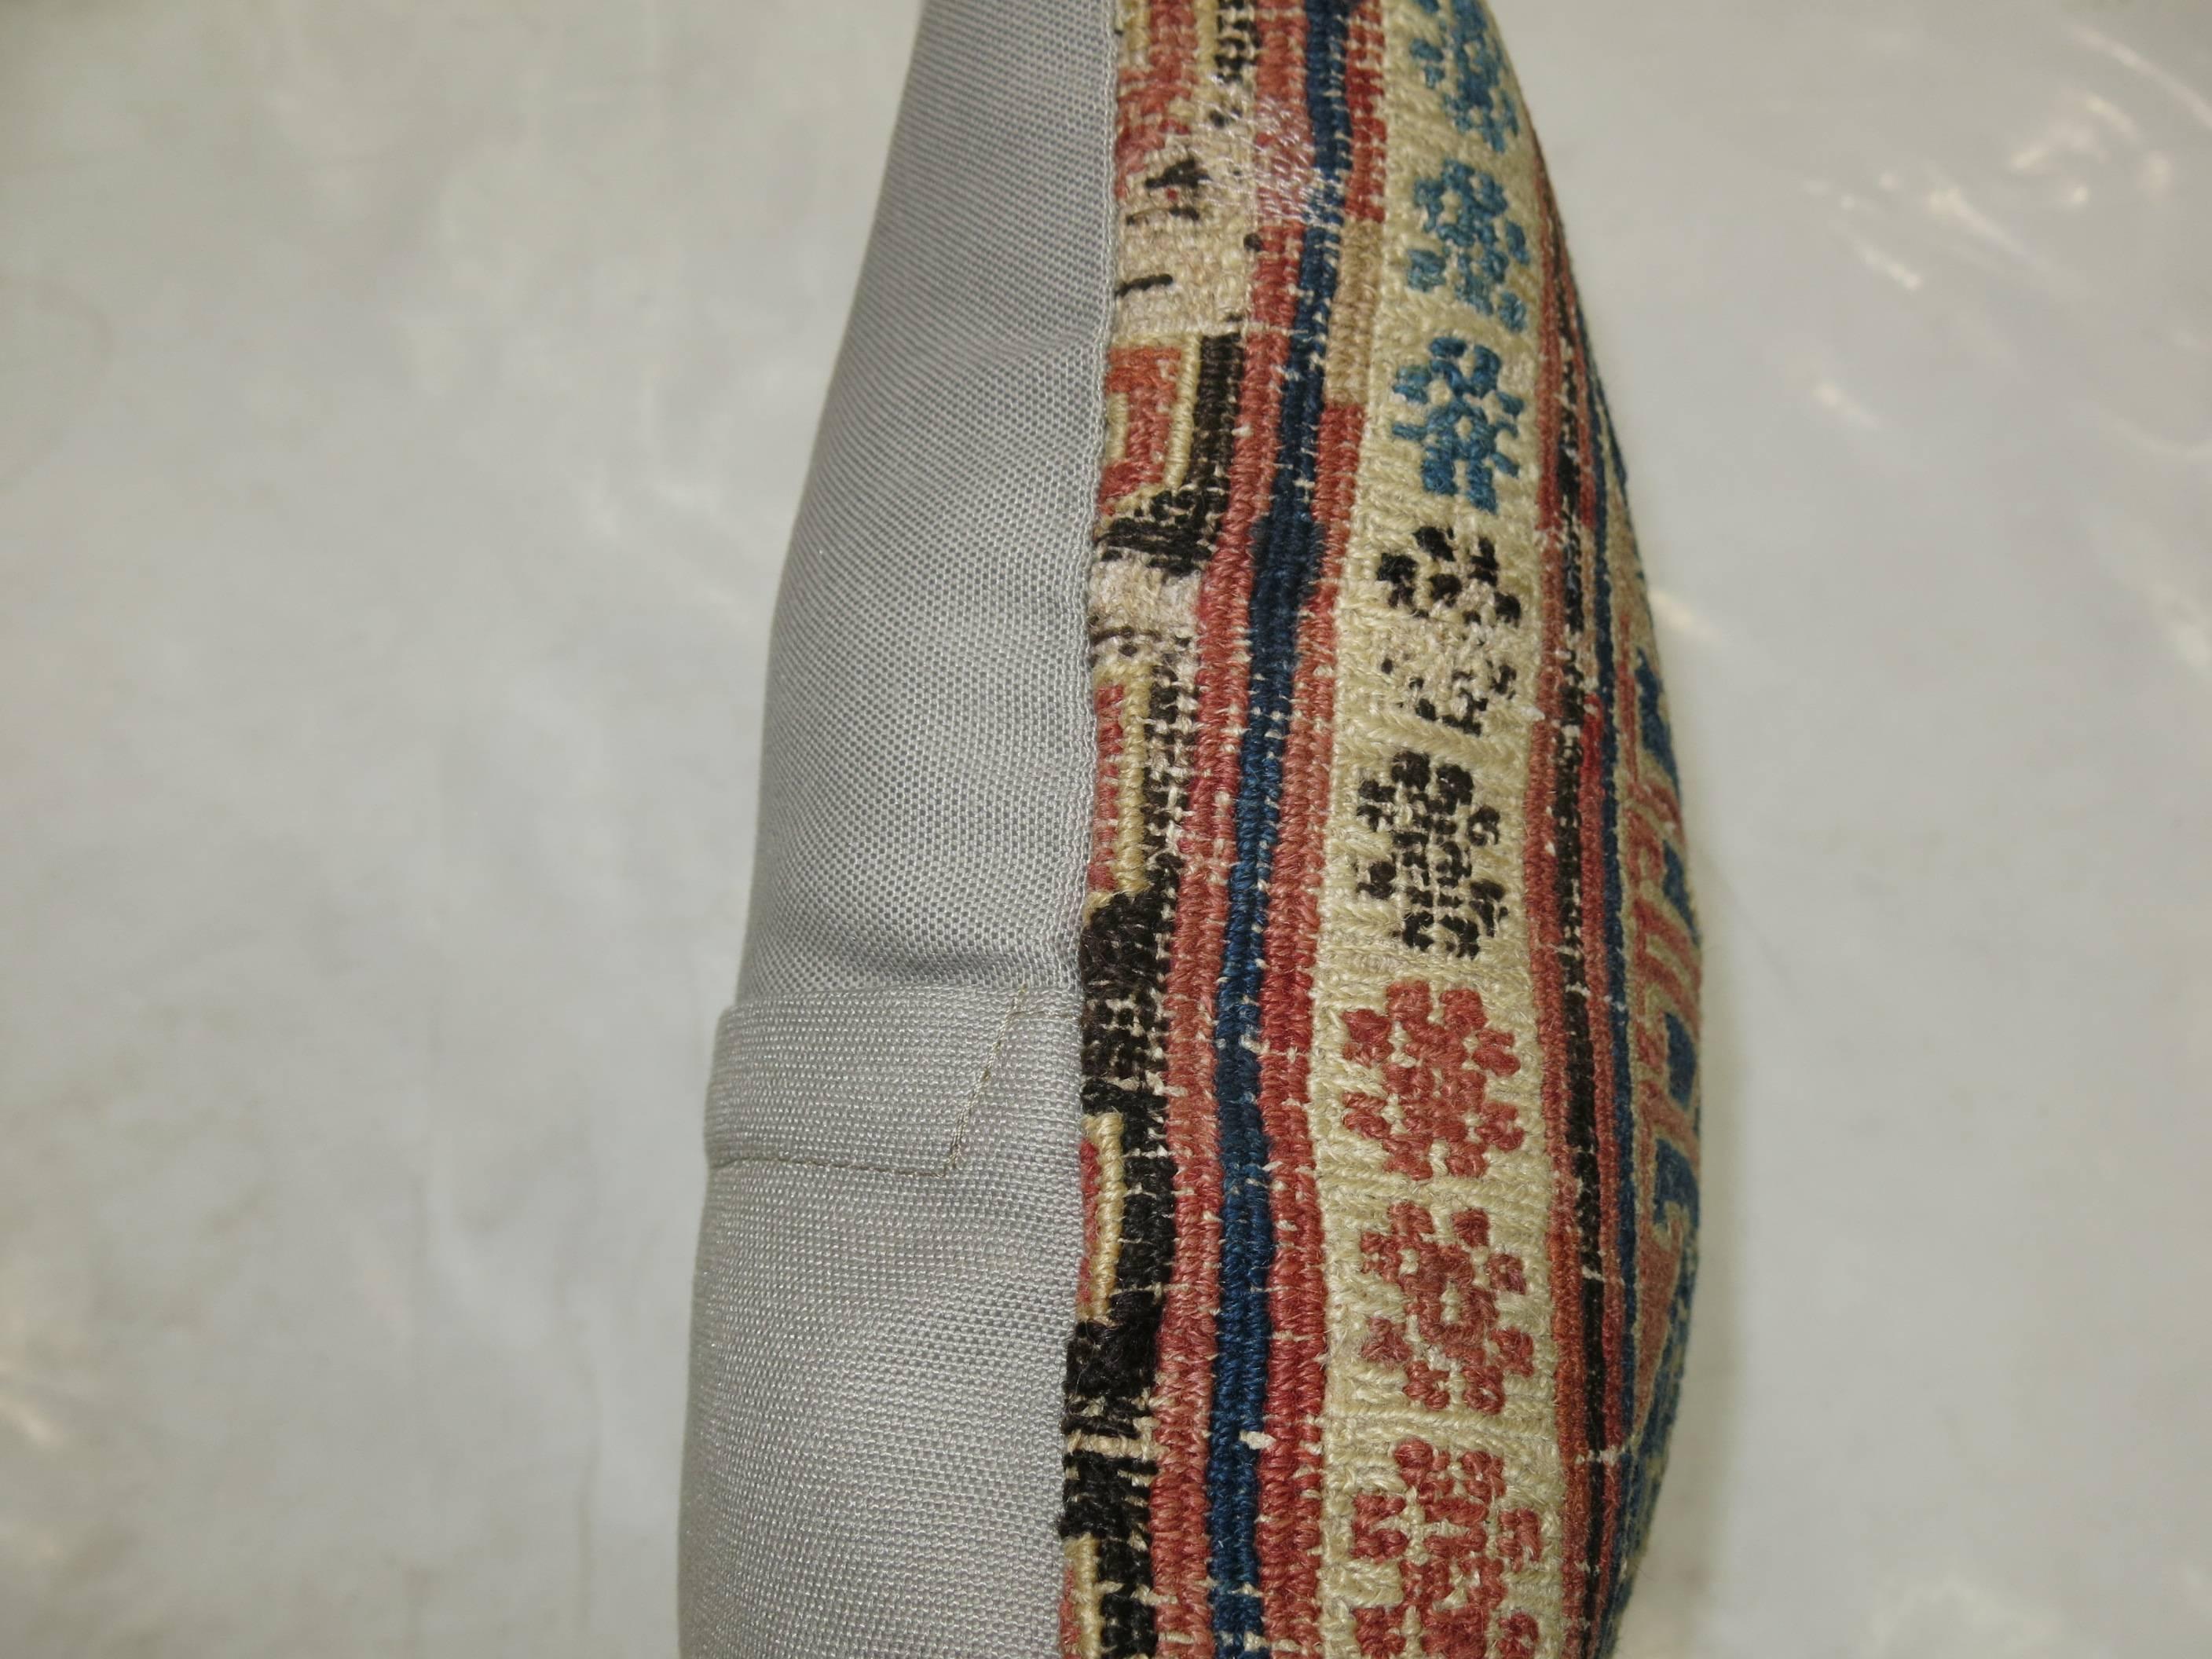 Pillow made from a 19th century Persian flat-weave.